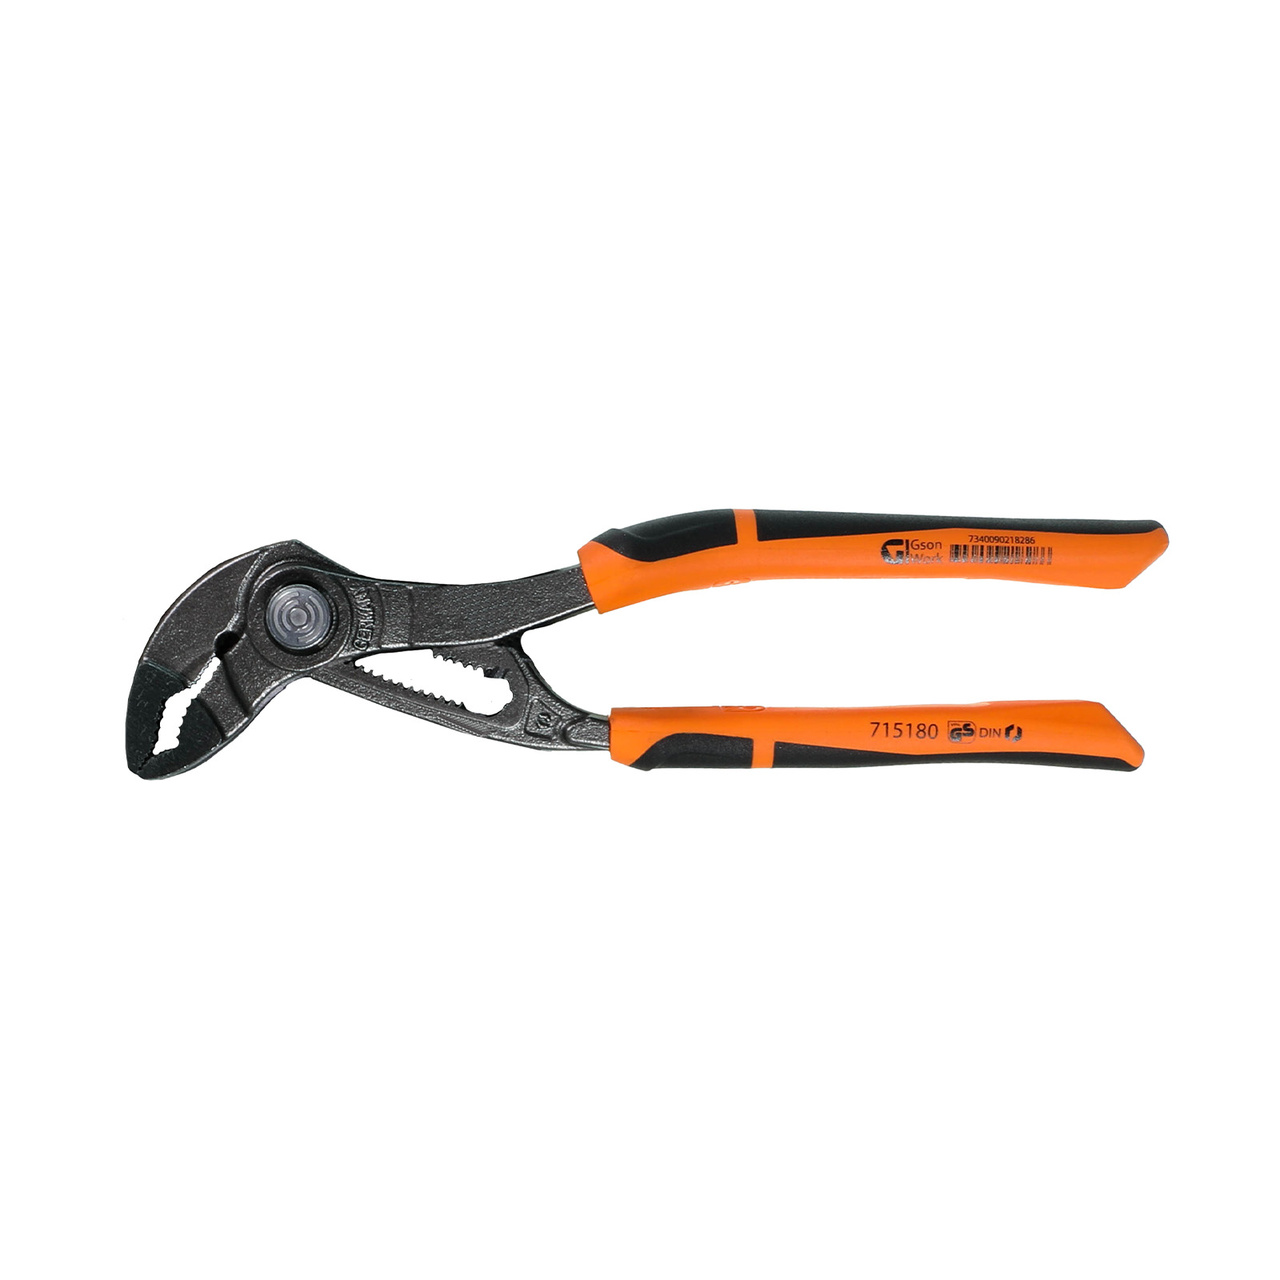 Water Pump Pliers with push-button